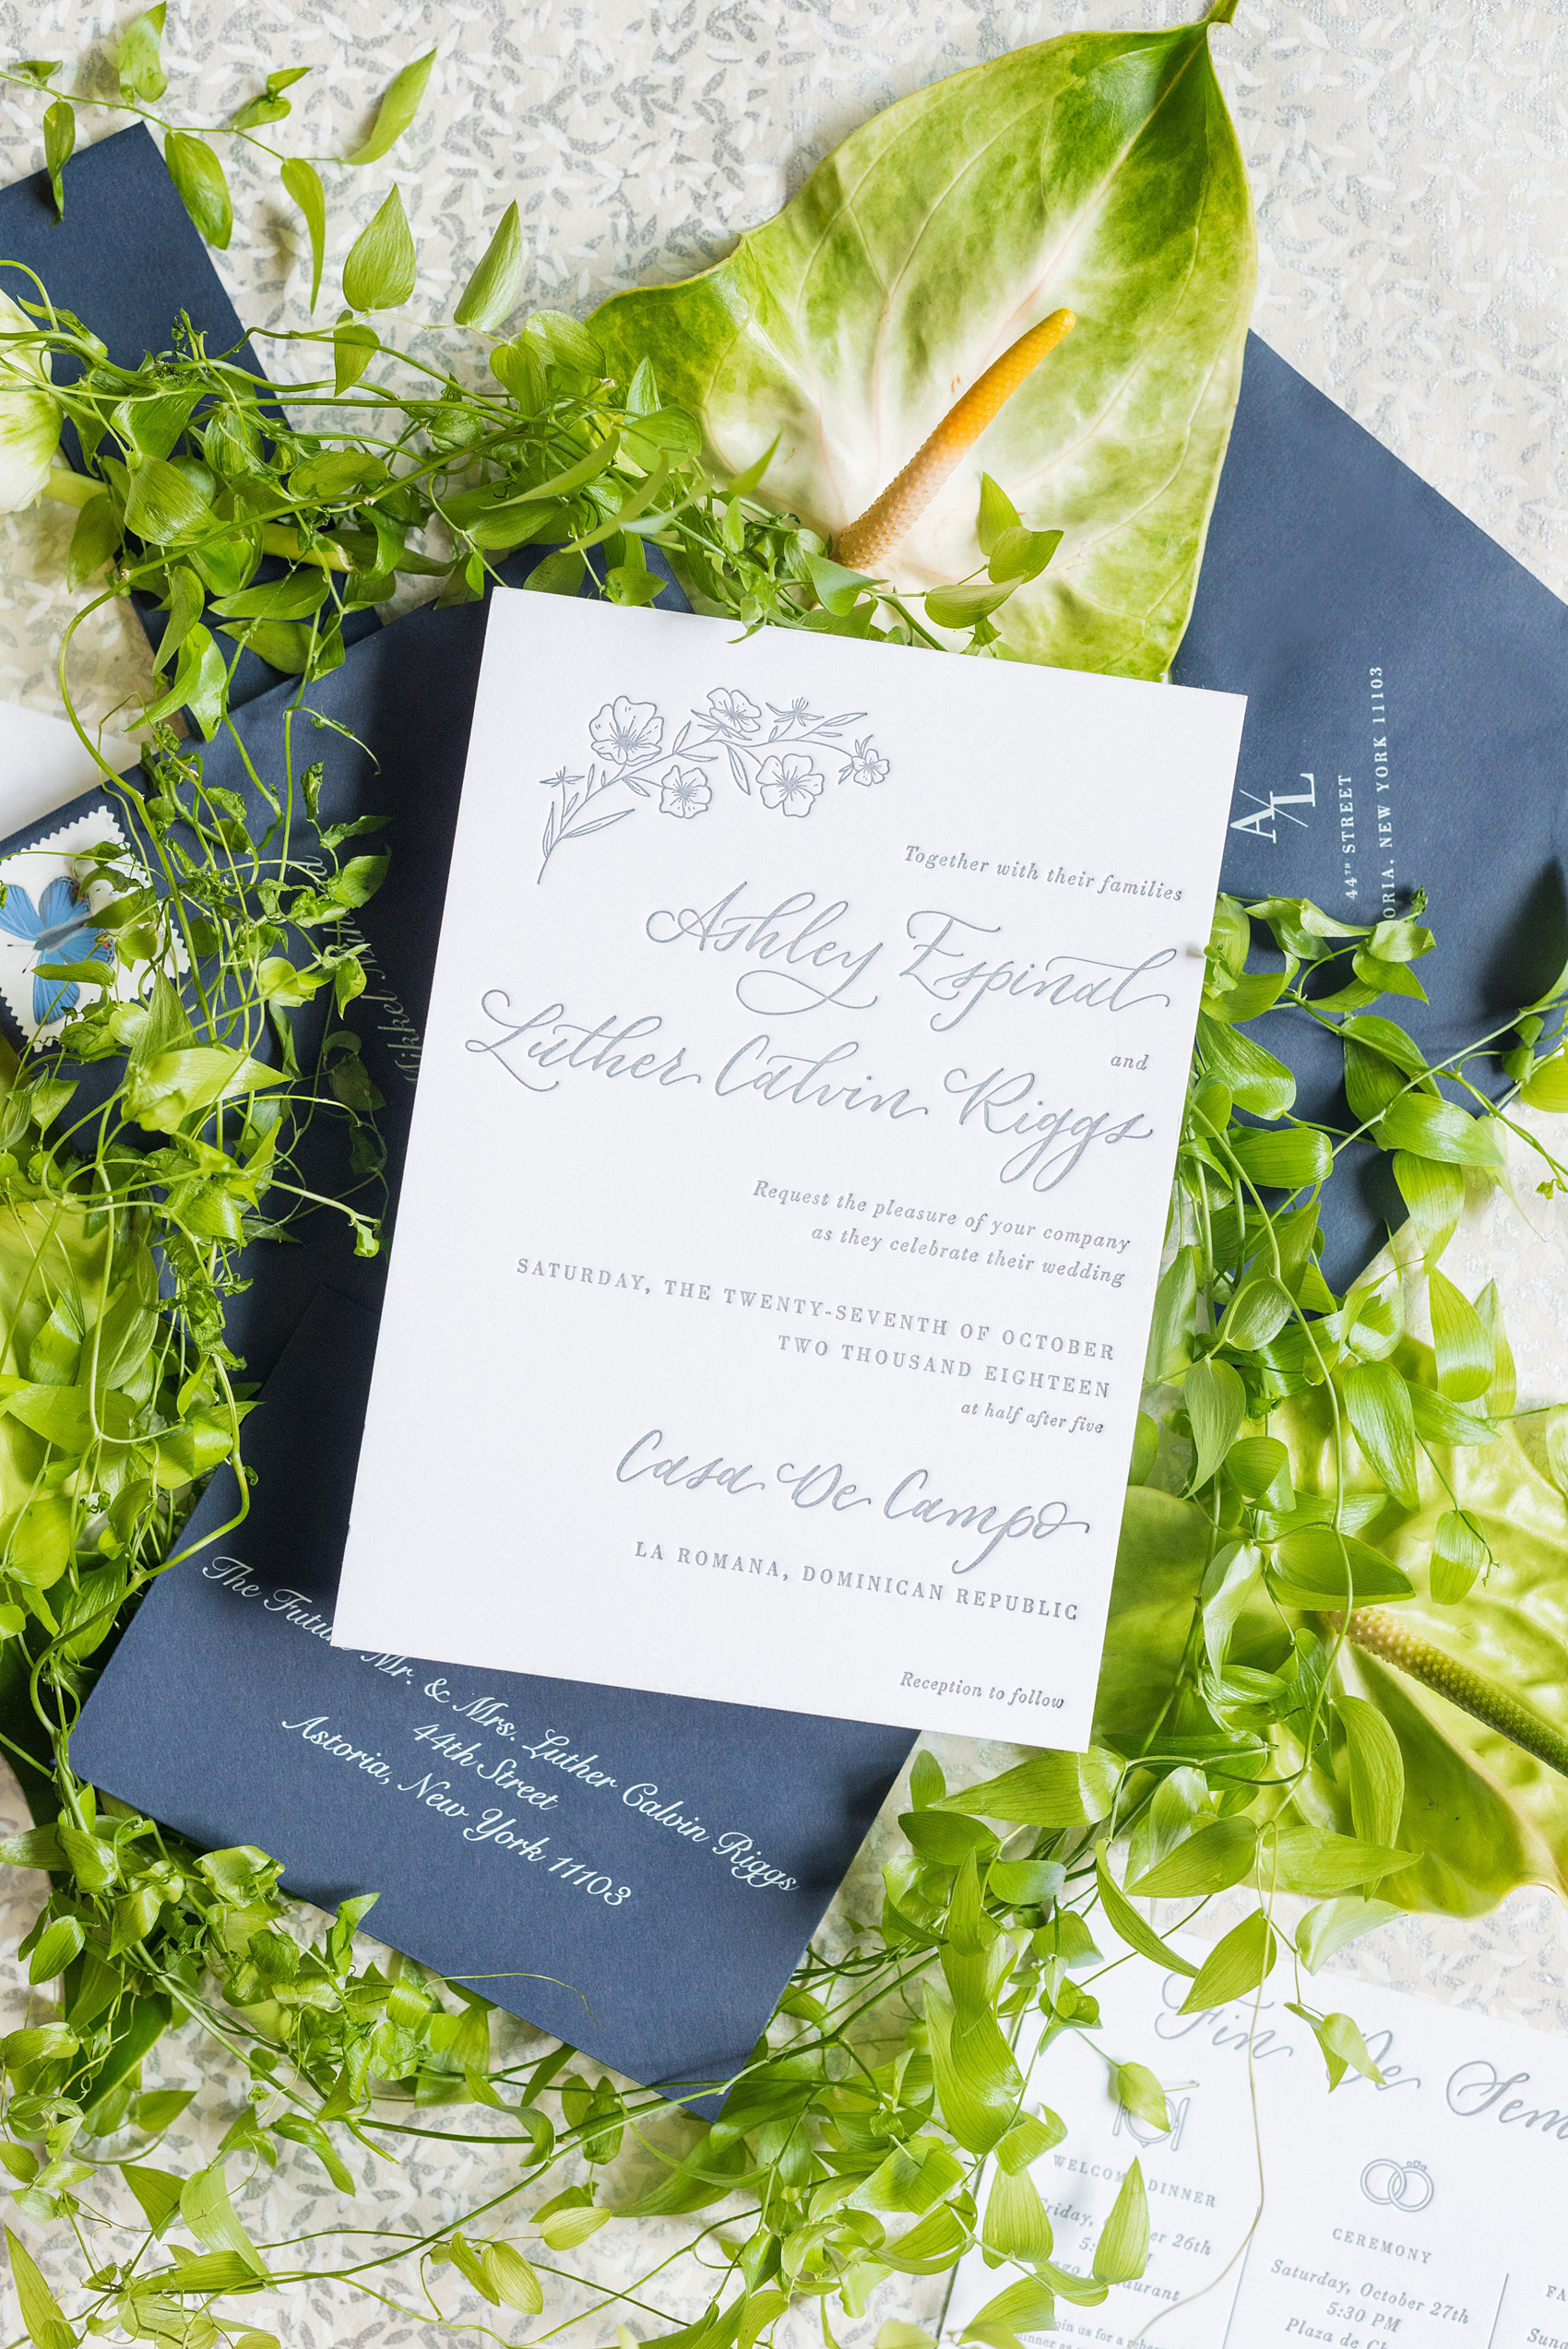 Casa de Campo in the Dominican Republic is a great location for a destination wedding. It’s in La Romana, an hour from Punta Cana, and is an all inclusive resort with Minitas beach and mountains view. It’s a beautiful venue, evidenced by these pictures by Mikkel Paige Photography. Click through for detail ideas like this blue invitation set with custom calligraphy! Planning by @theeventeur, invitation by @agianetti of Write Pretty for Me. #mikkelpaige #bluewedding #weddinginvitation #letterpress #waxseal #customcalligraphy #vintagestamps #silkribbons